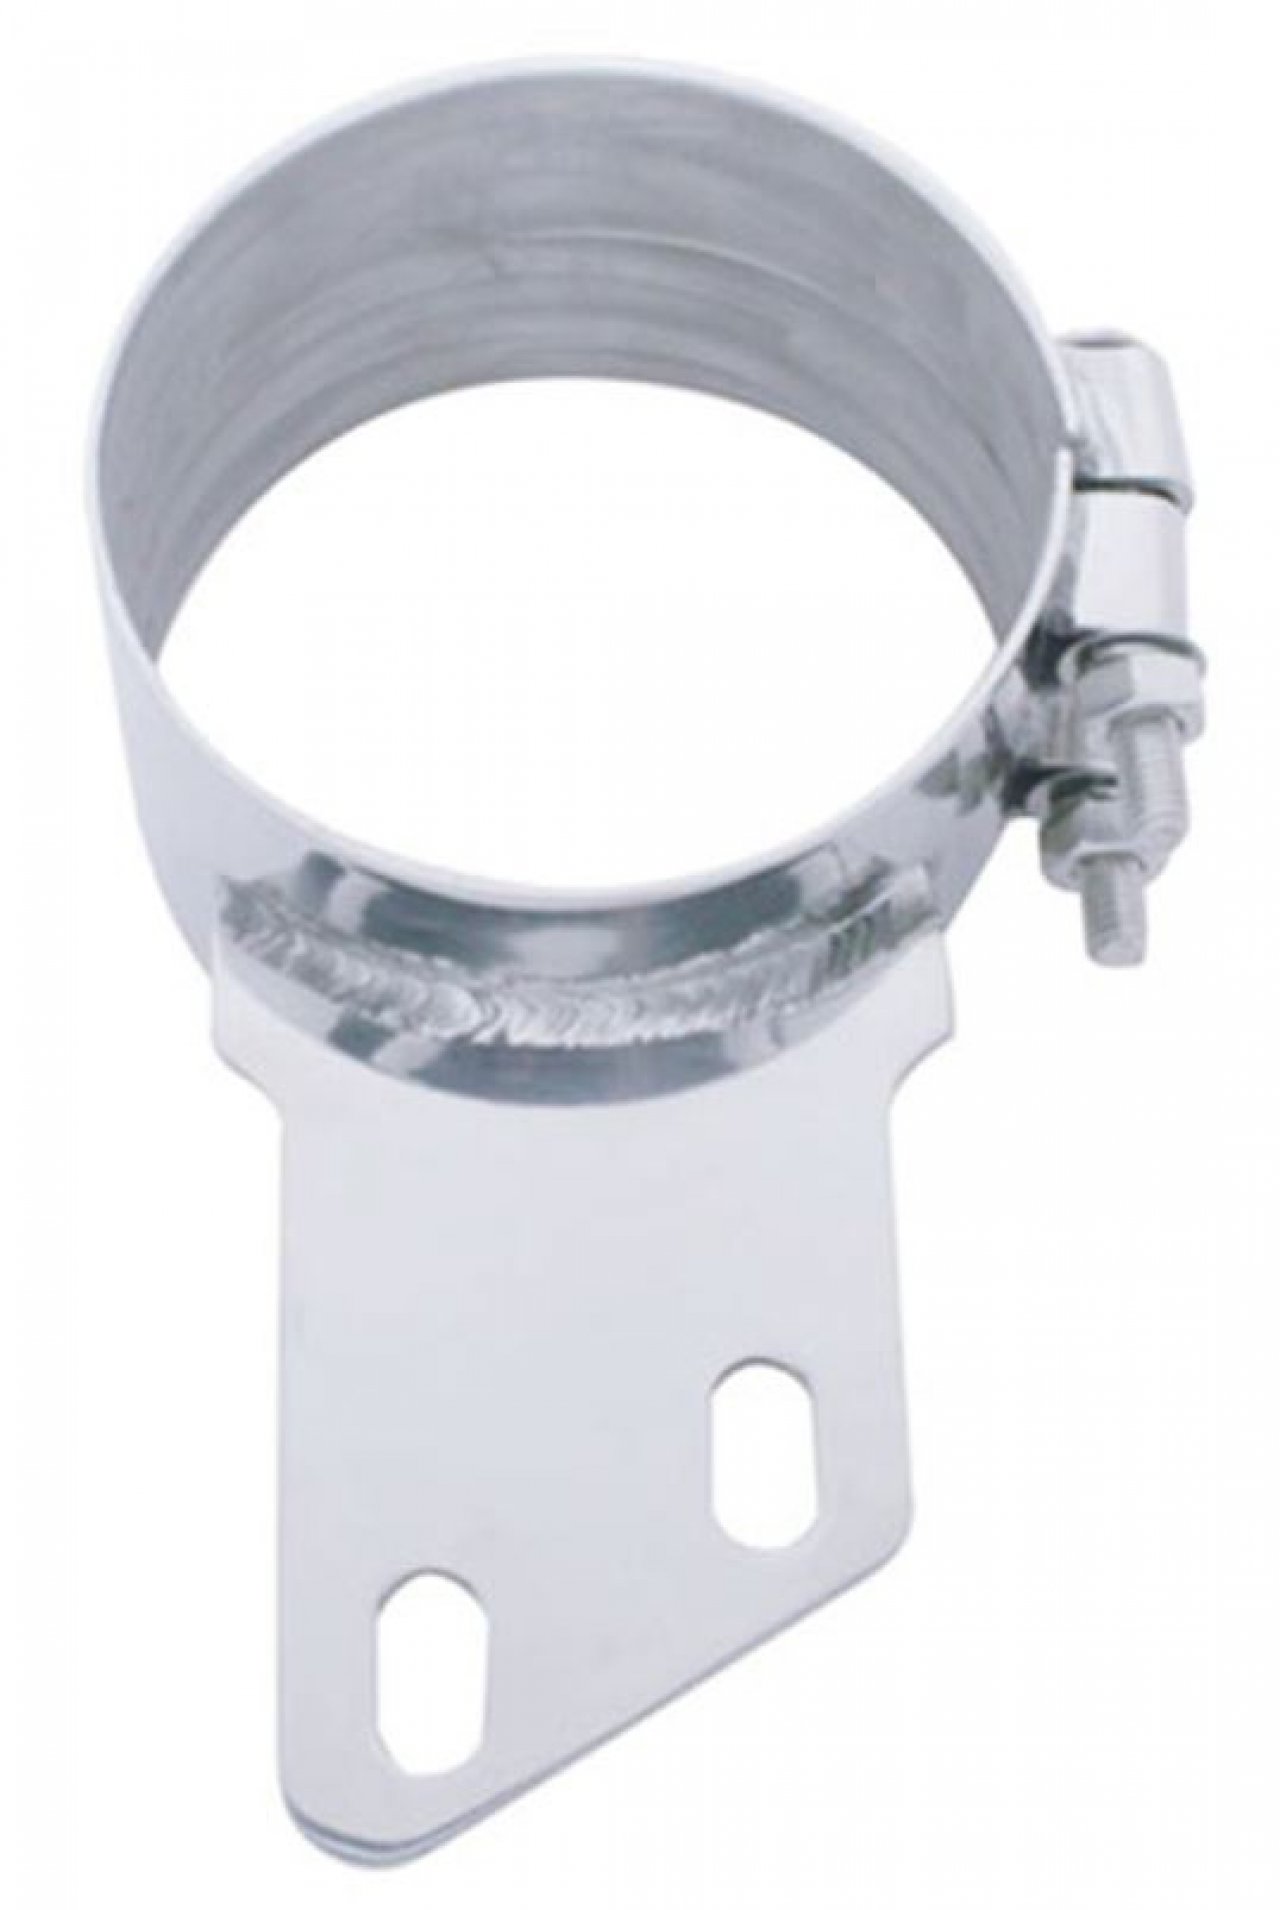 BF 01-0800700 Exhaust Clamp